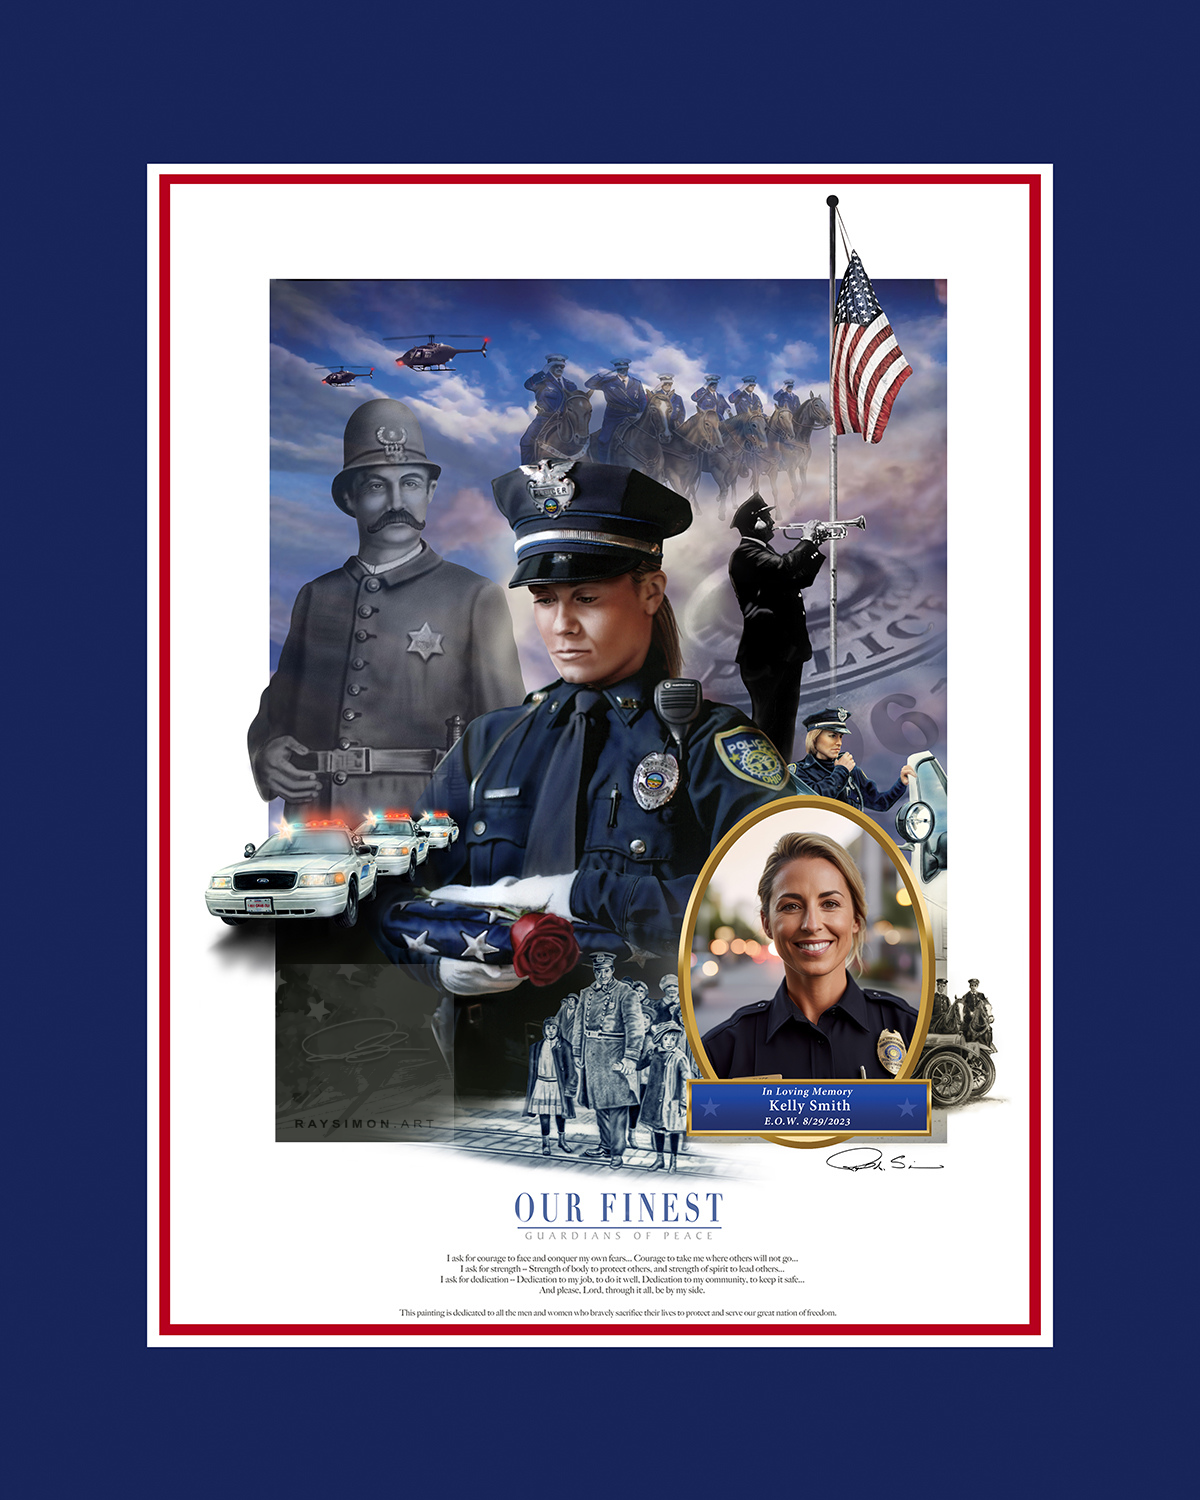 Police Artwork - 'Our Finest'